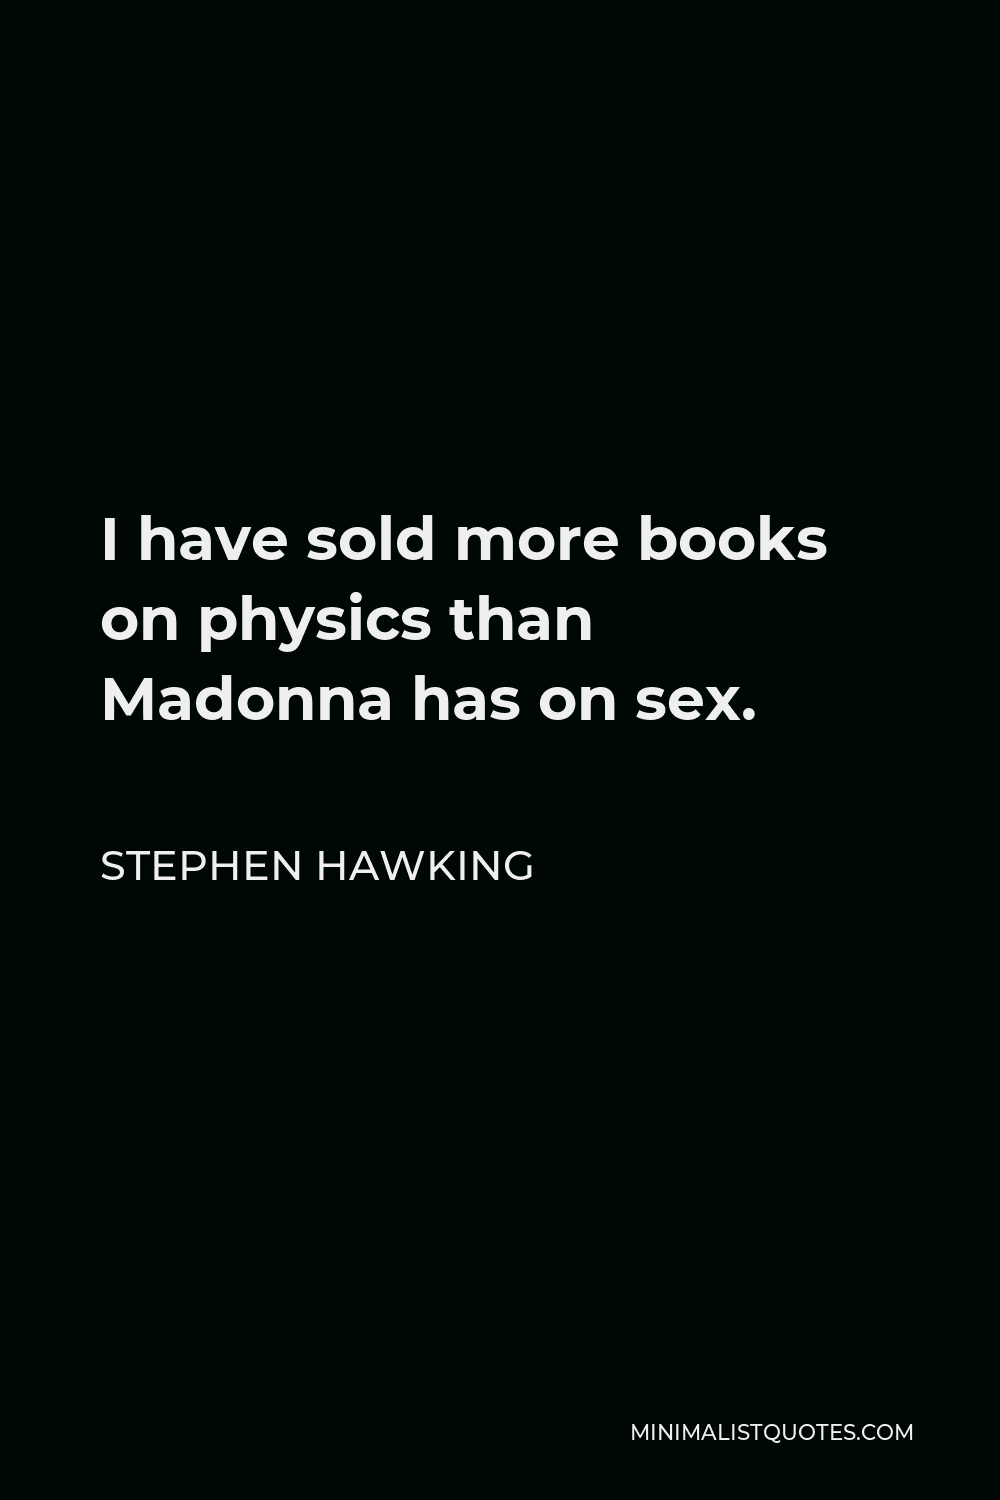 Stephen Hawking Quote: I have sold more books on physics than Madonna has on sex.